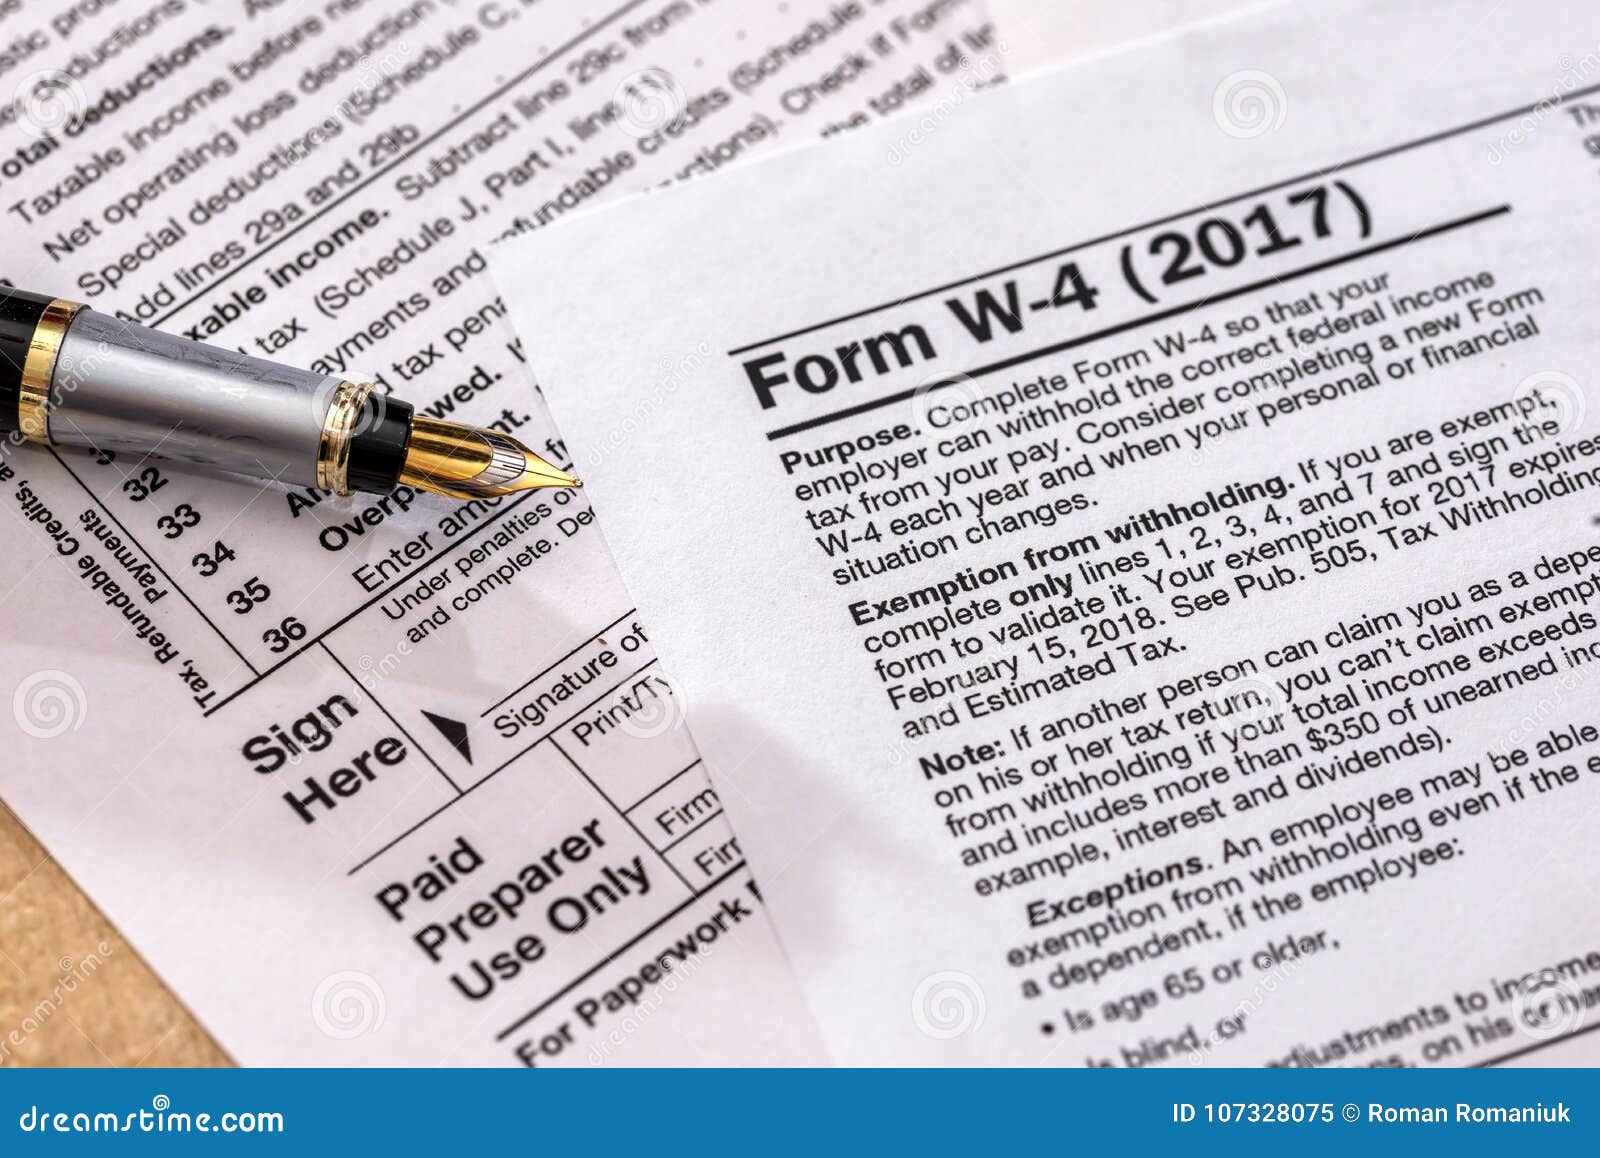 corporate-tax-return-form-1120-editorial-image-image-of-schedule